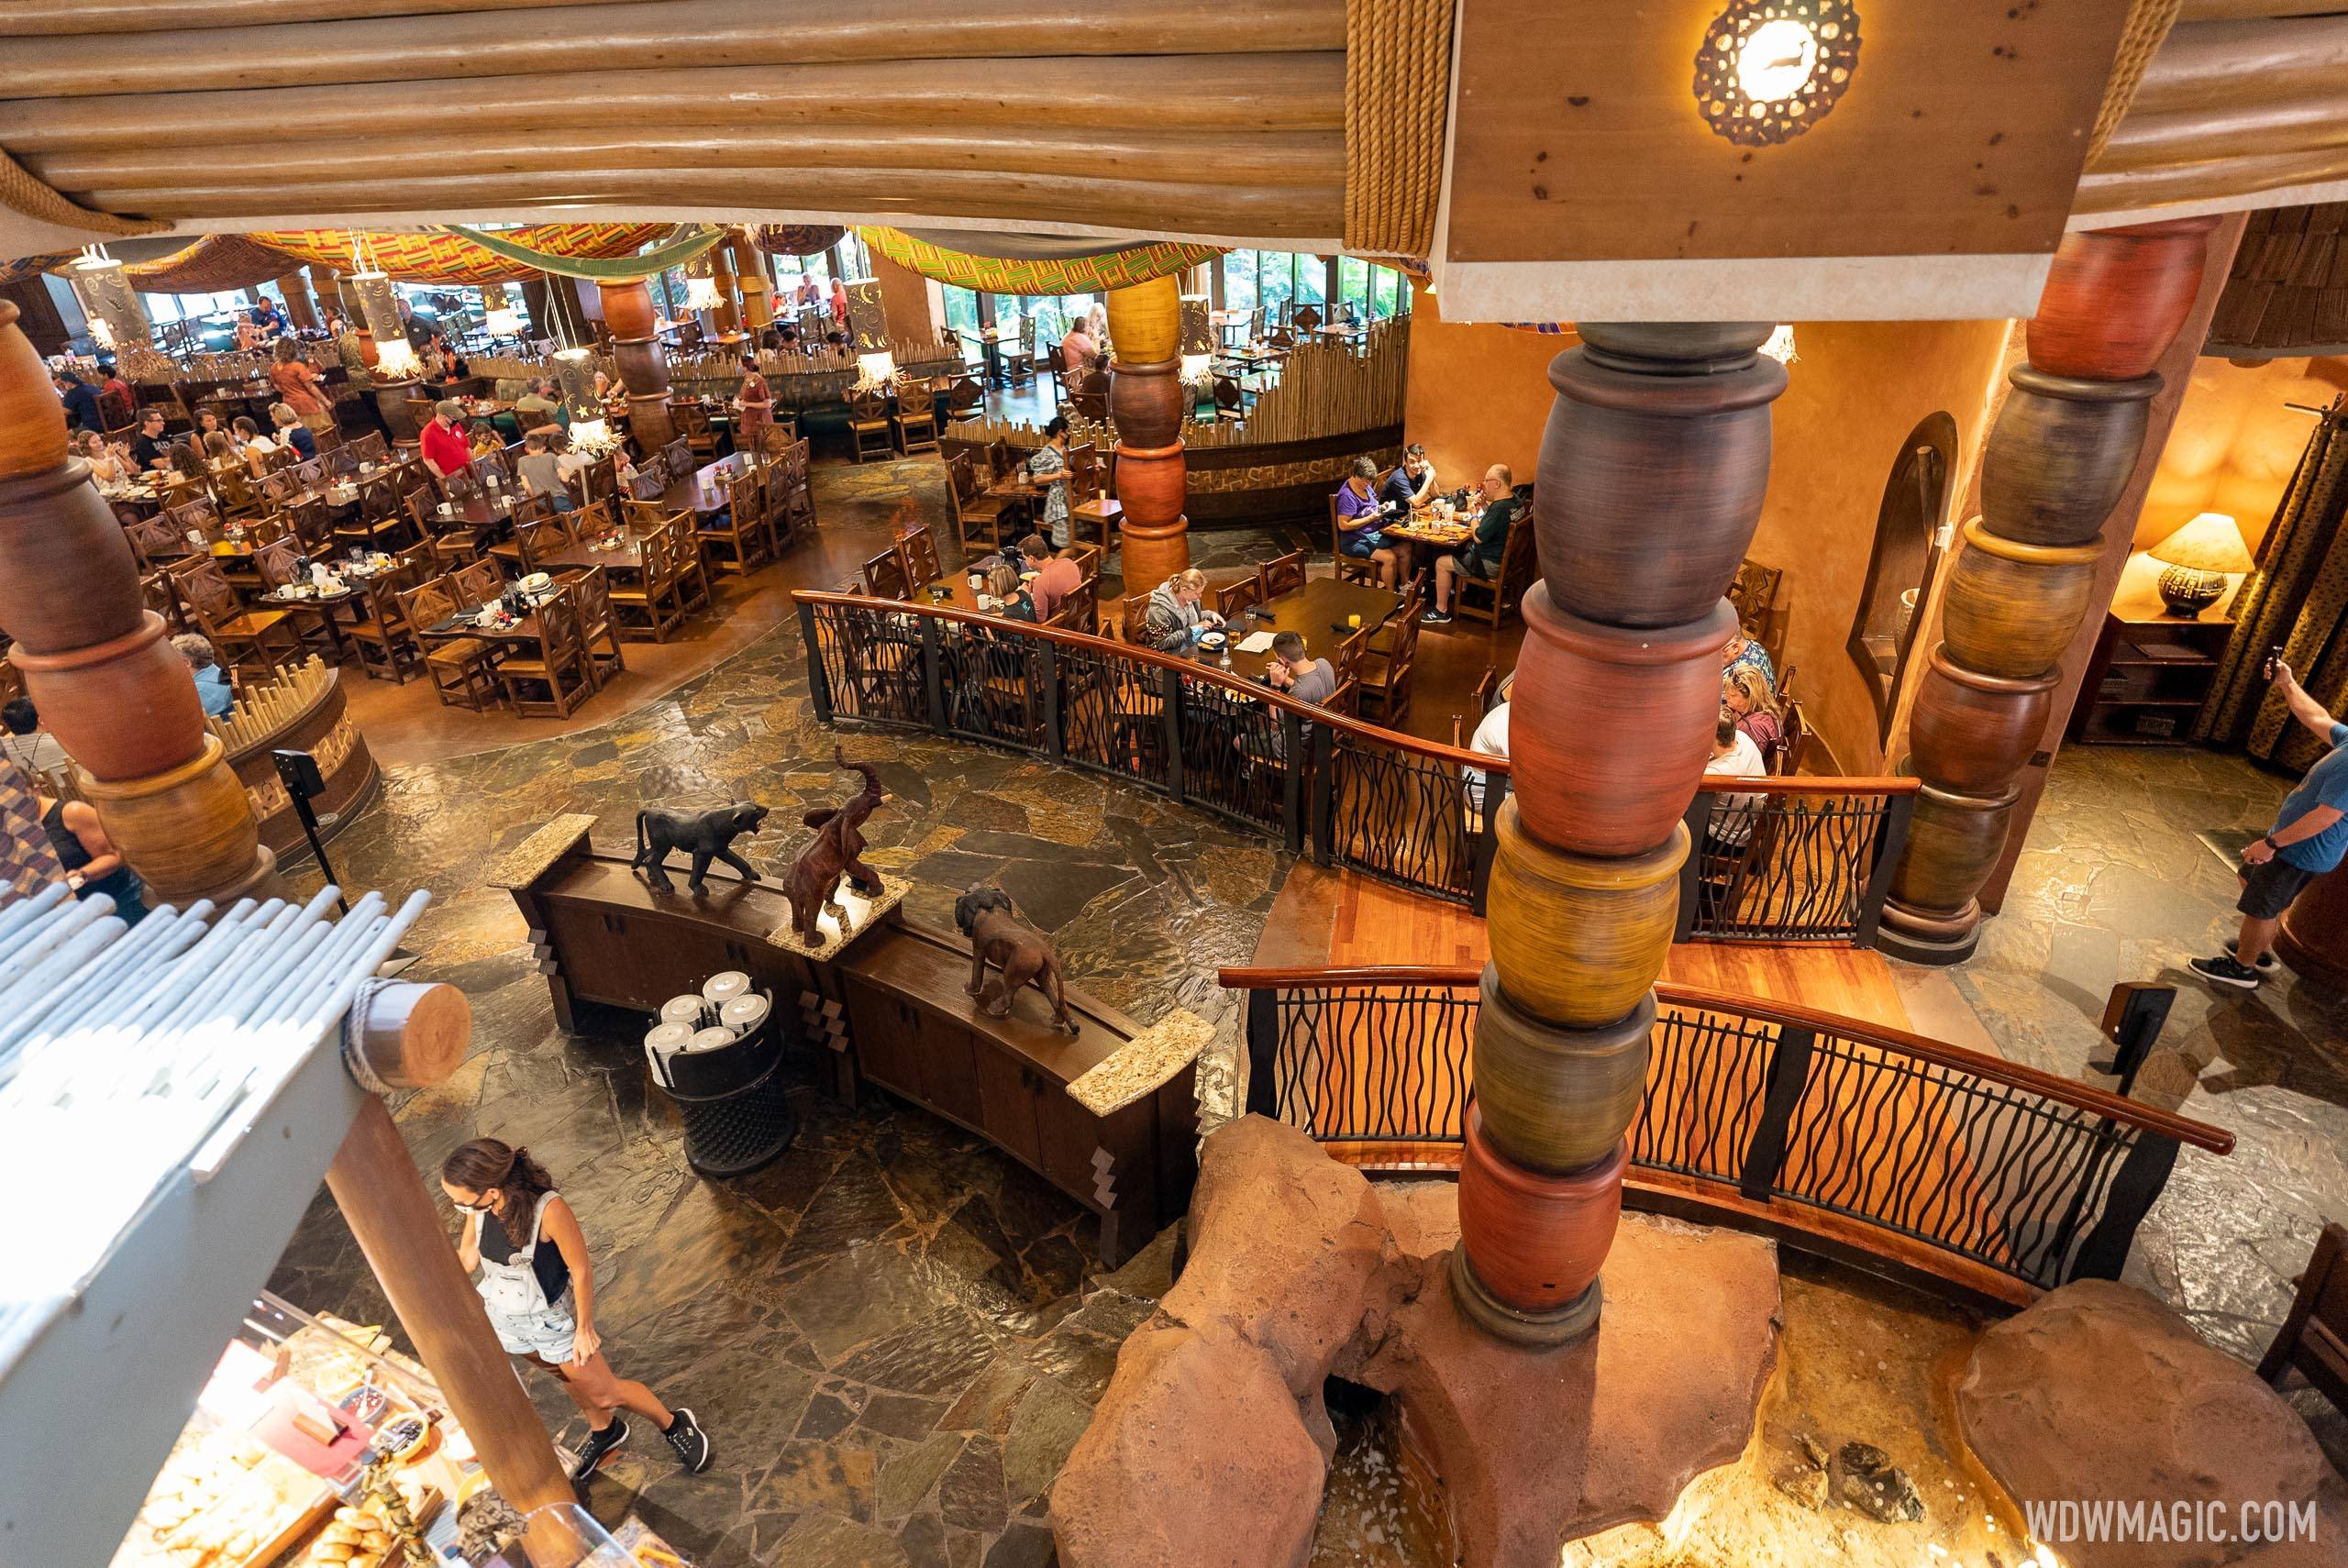 Walt Disney World Annual Passholders now receive a 20% discount at many table service restaurants